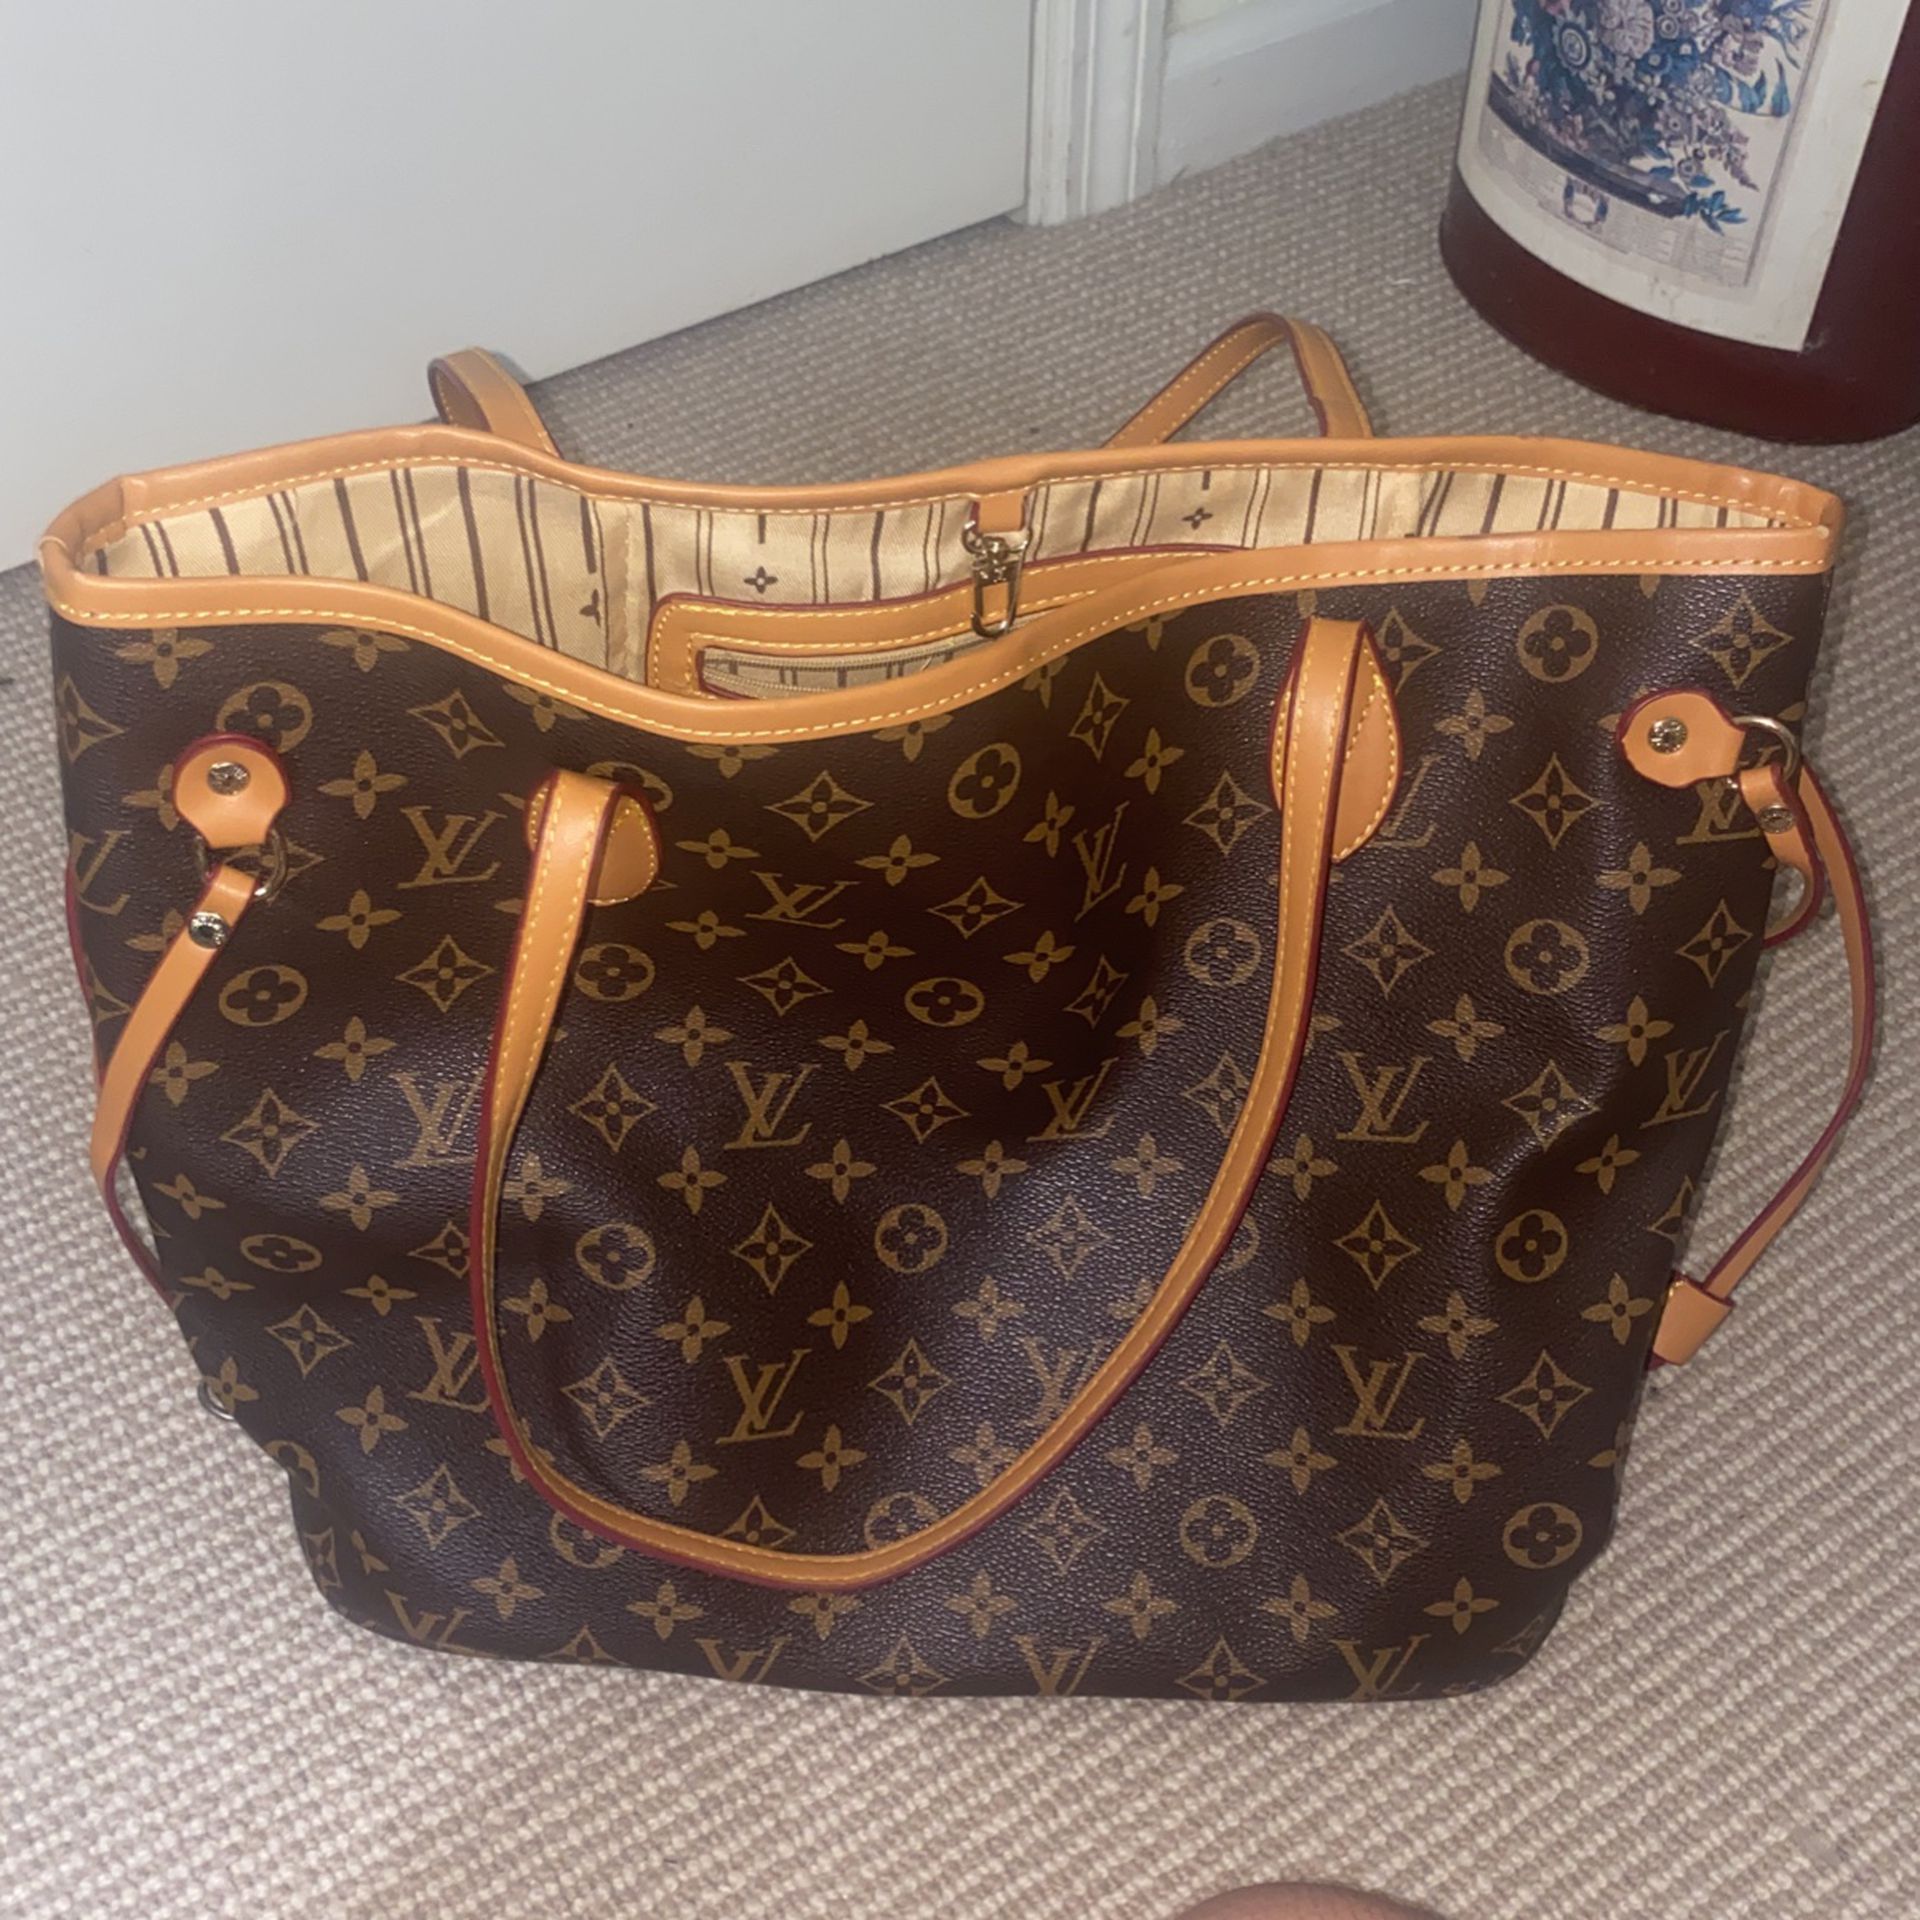 Vintage Louis Vuitton Purse/Handbag Never Used With Writing